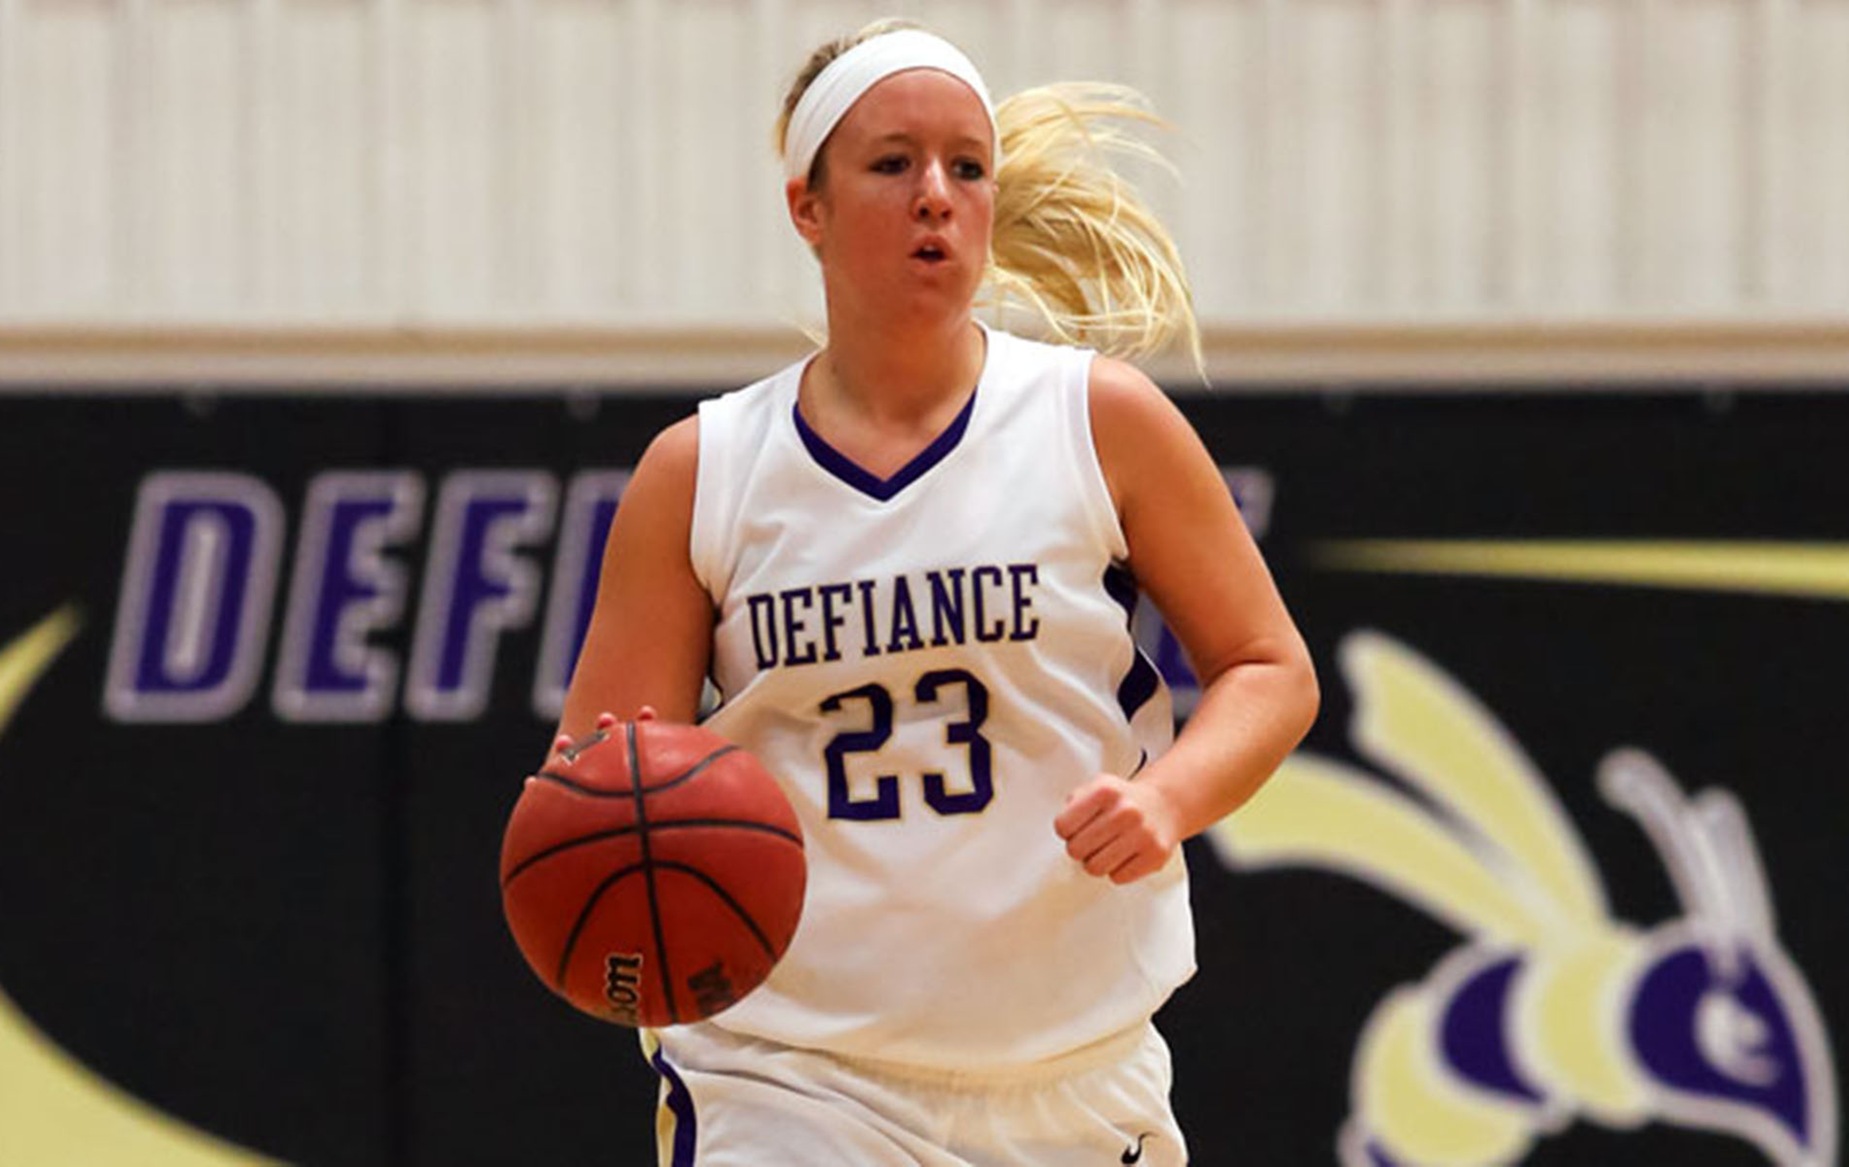 King Sets All-Time Three Record in DC's First HCAC Defeat